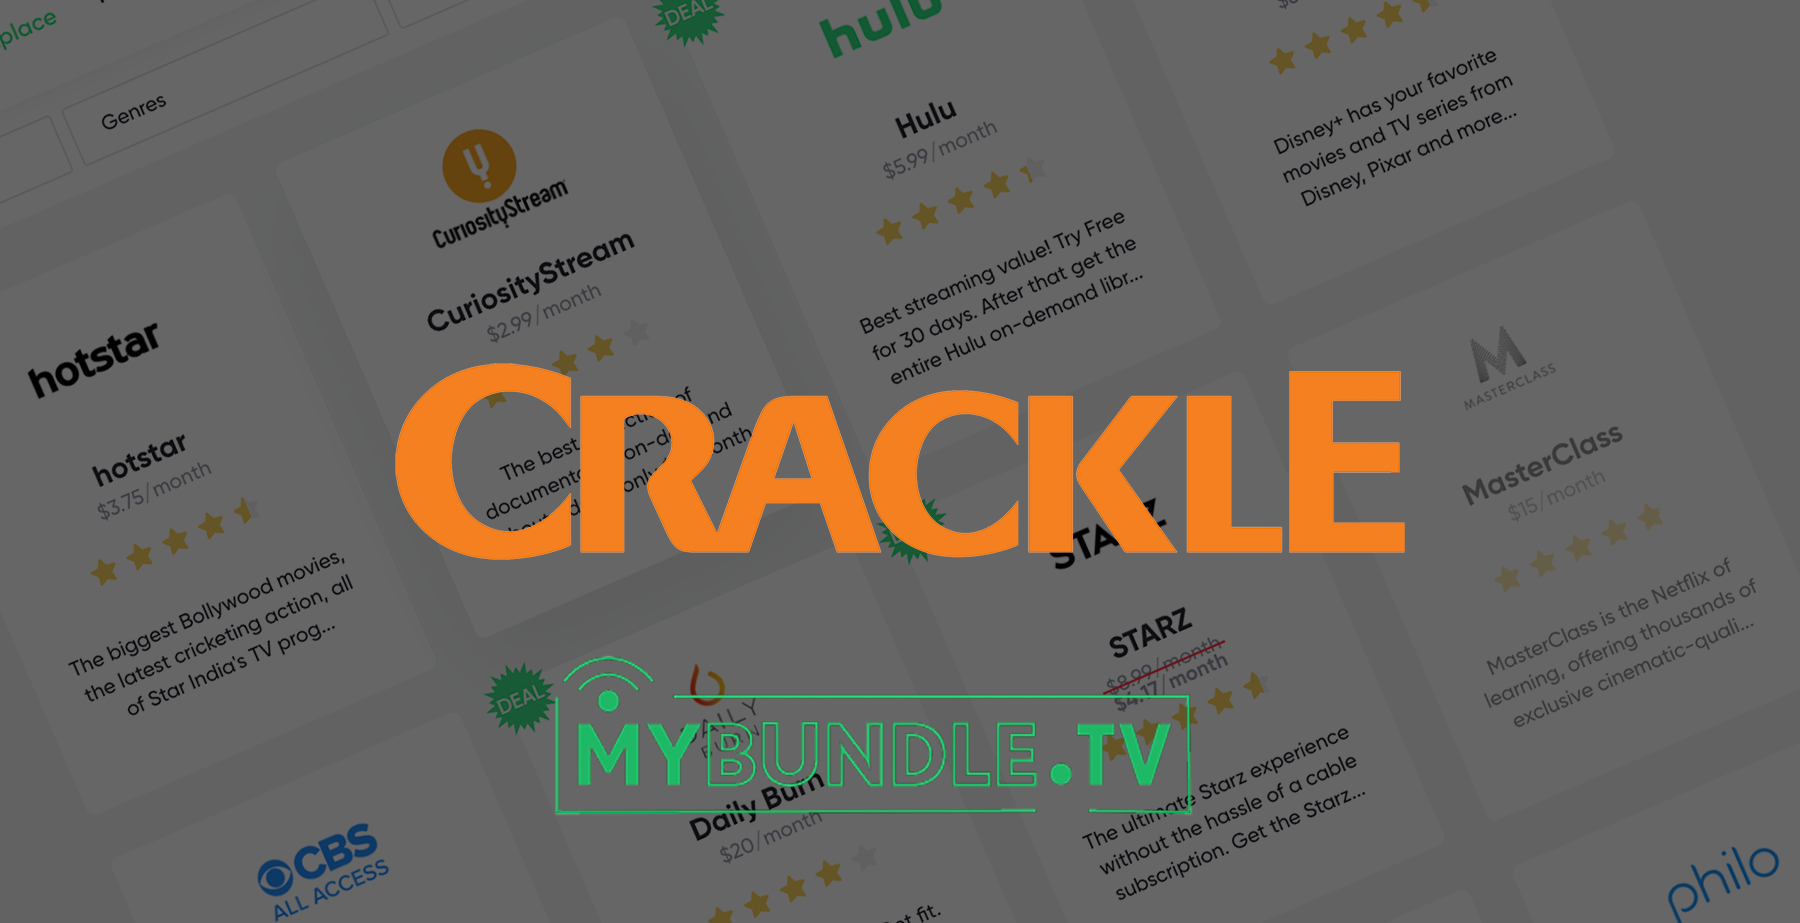 crackle full free movies